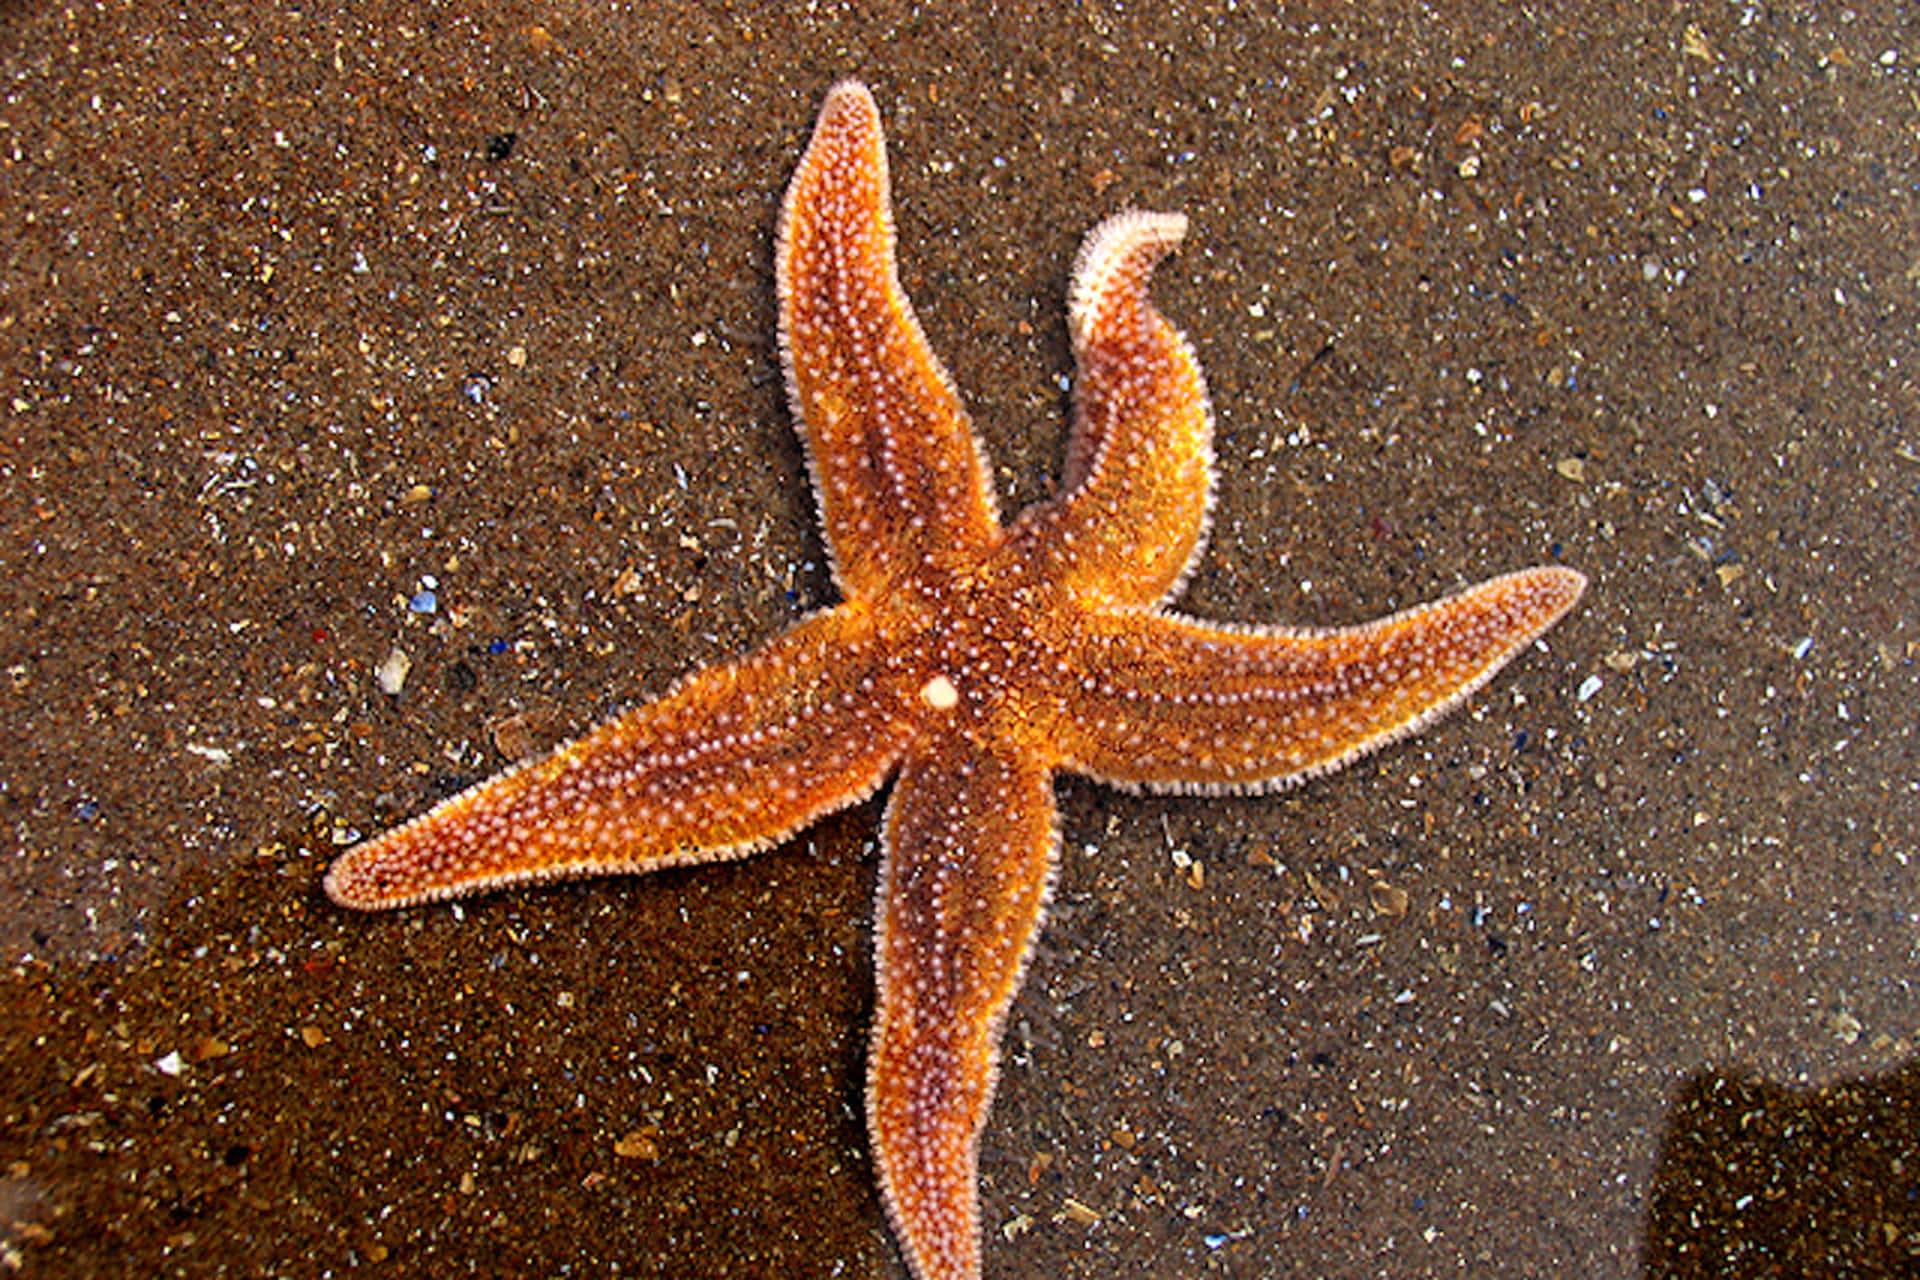 A Variety of Starfish in Colorful Habitat